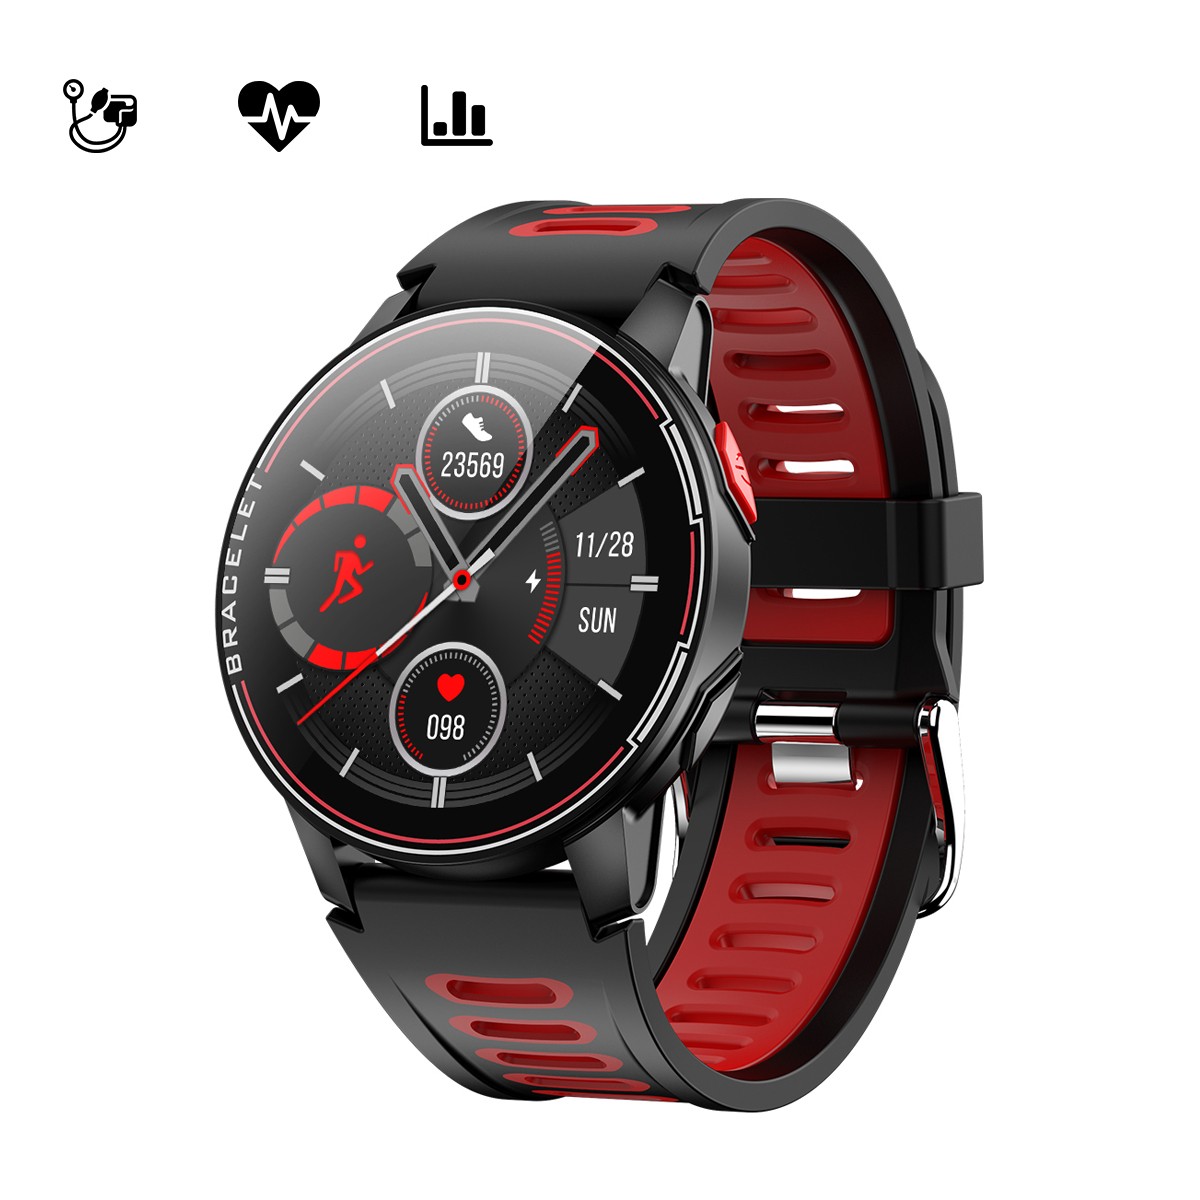 Smartwatch bluetooth, 10 functii, masurare tensiune, puls, ios Android, IP67, SoVogue Android